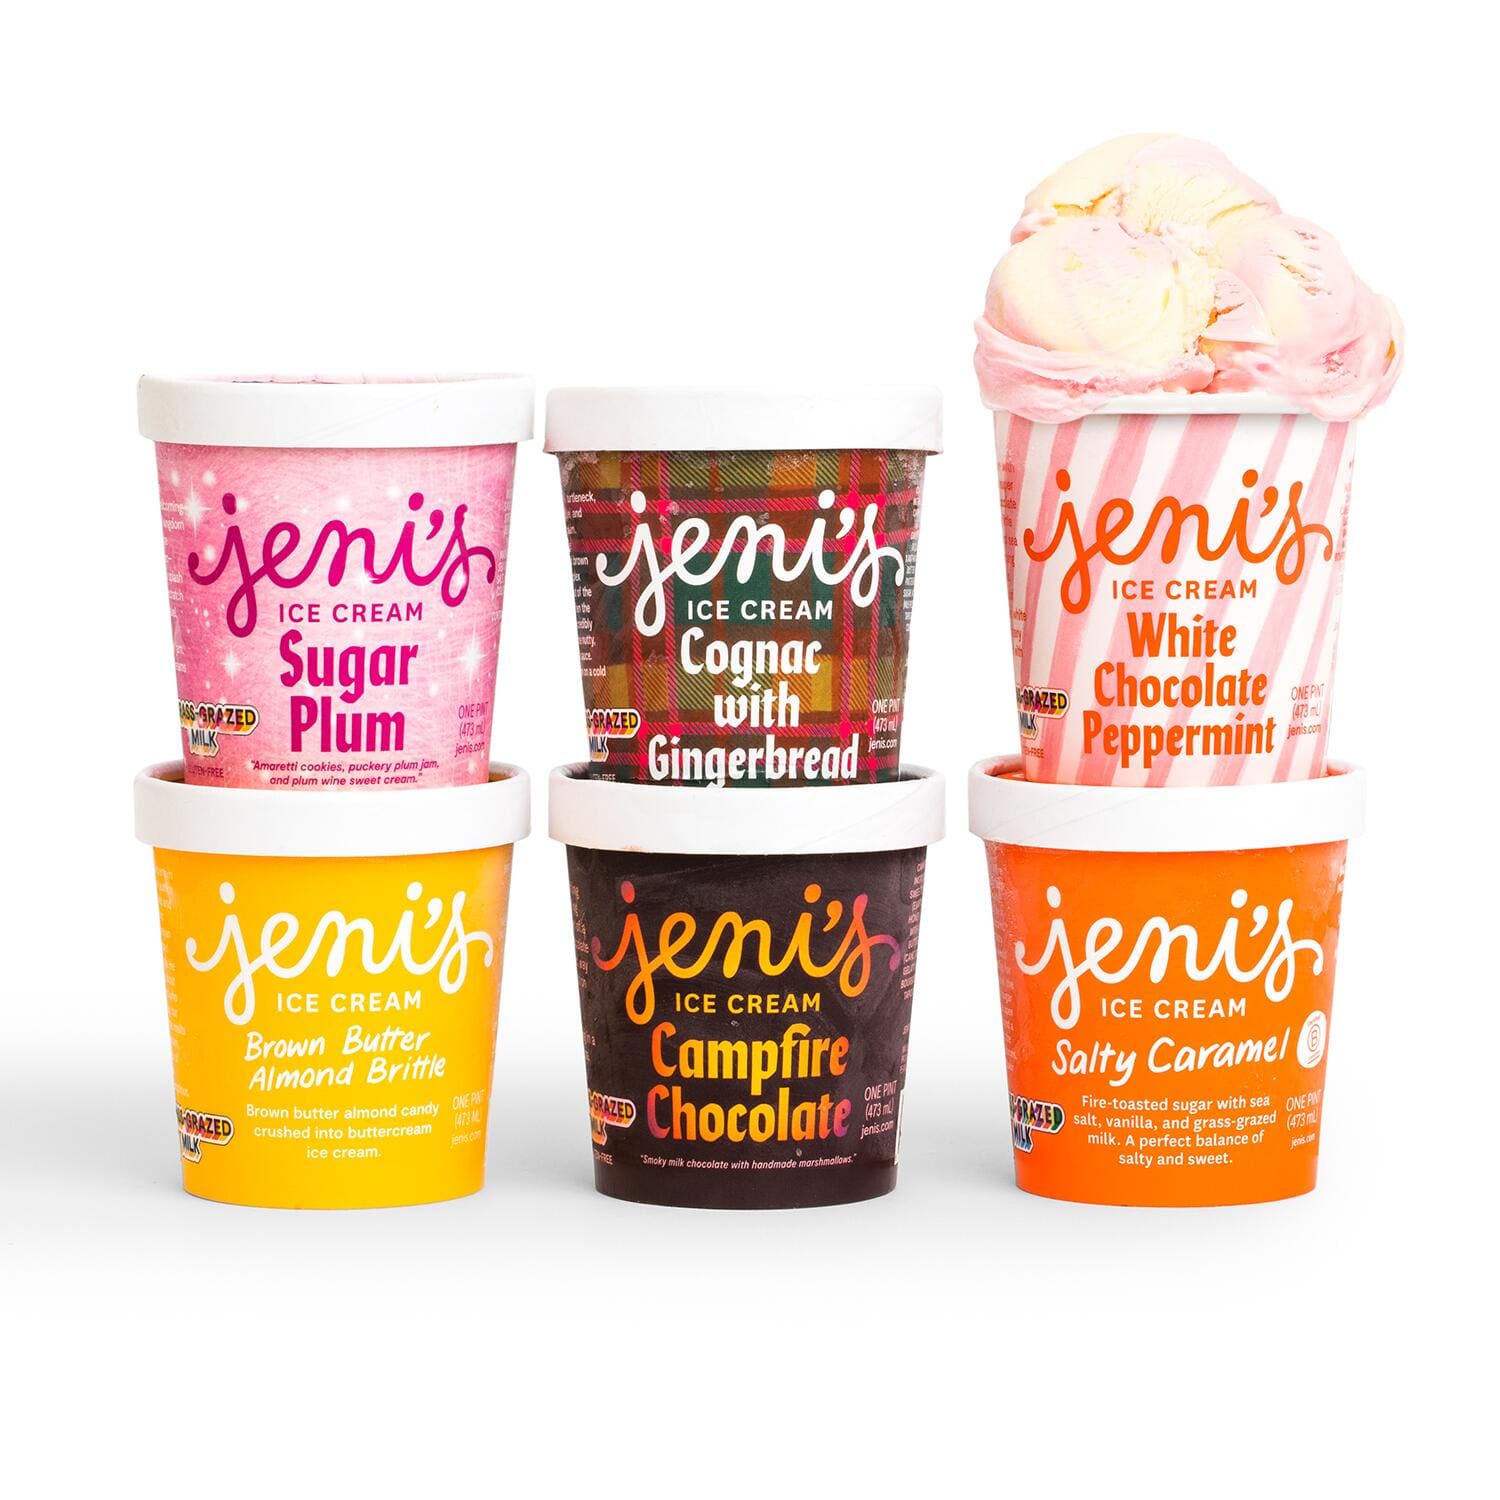 Holiday Ice  Cream  Flavors  From Your Favorite Ice  Creameries